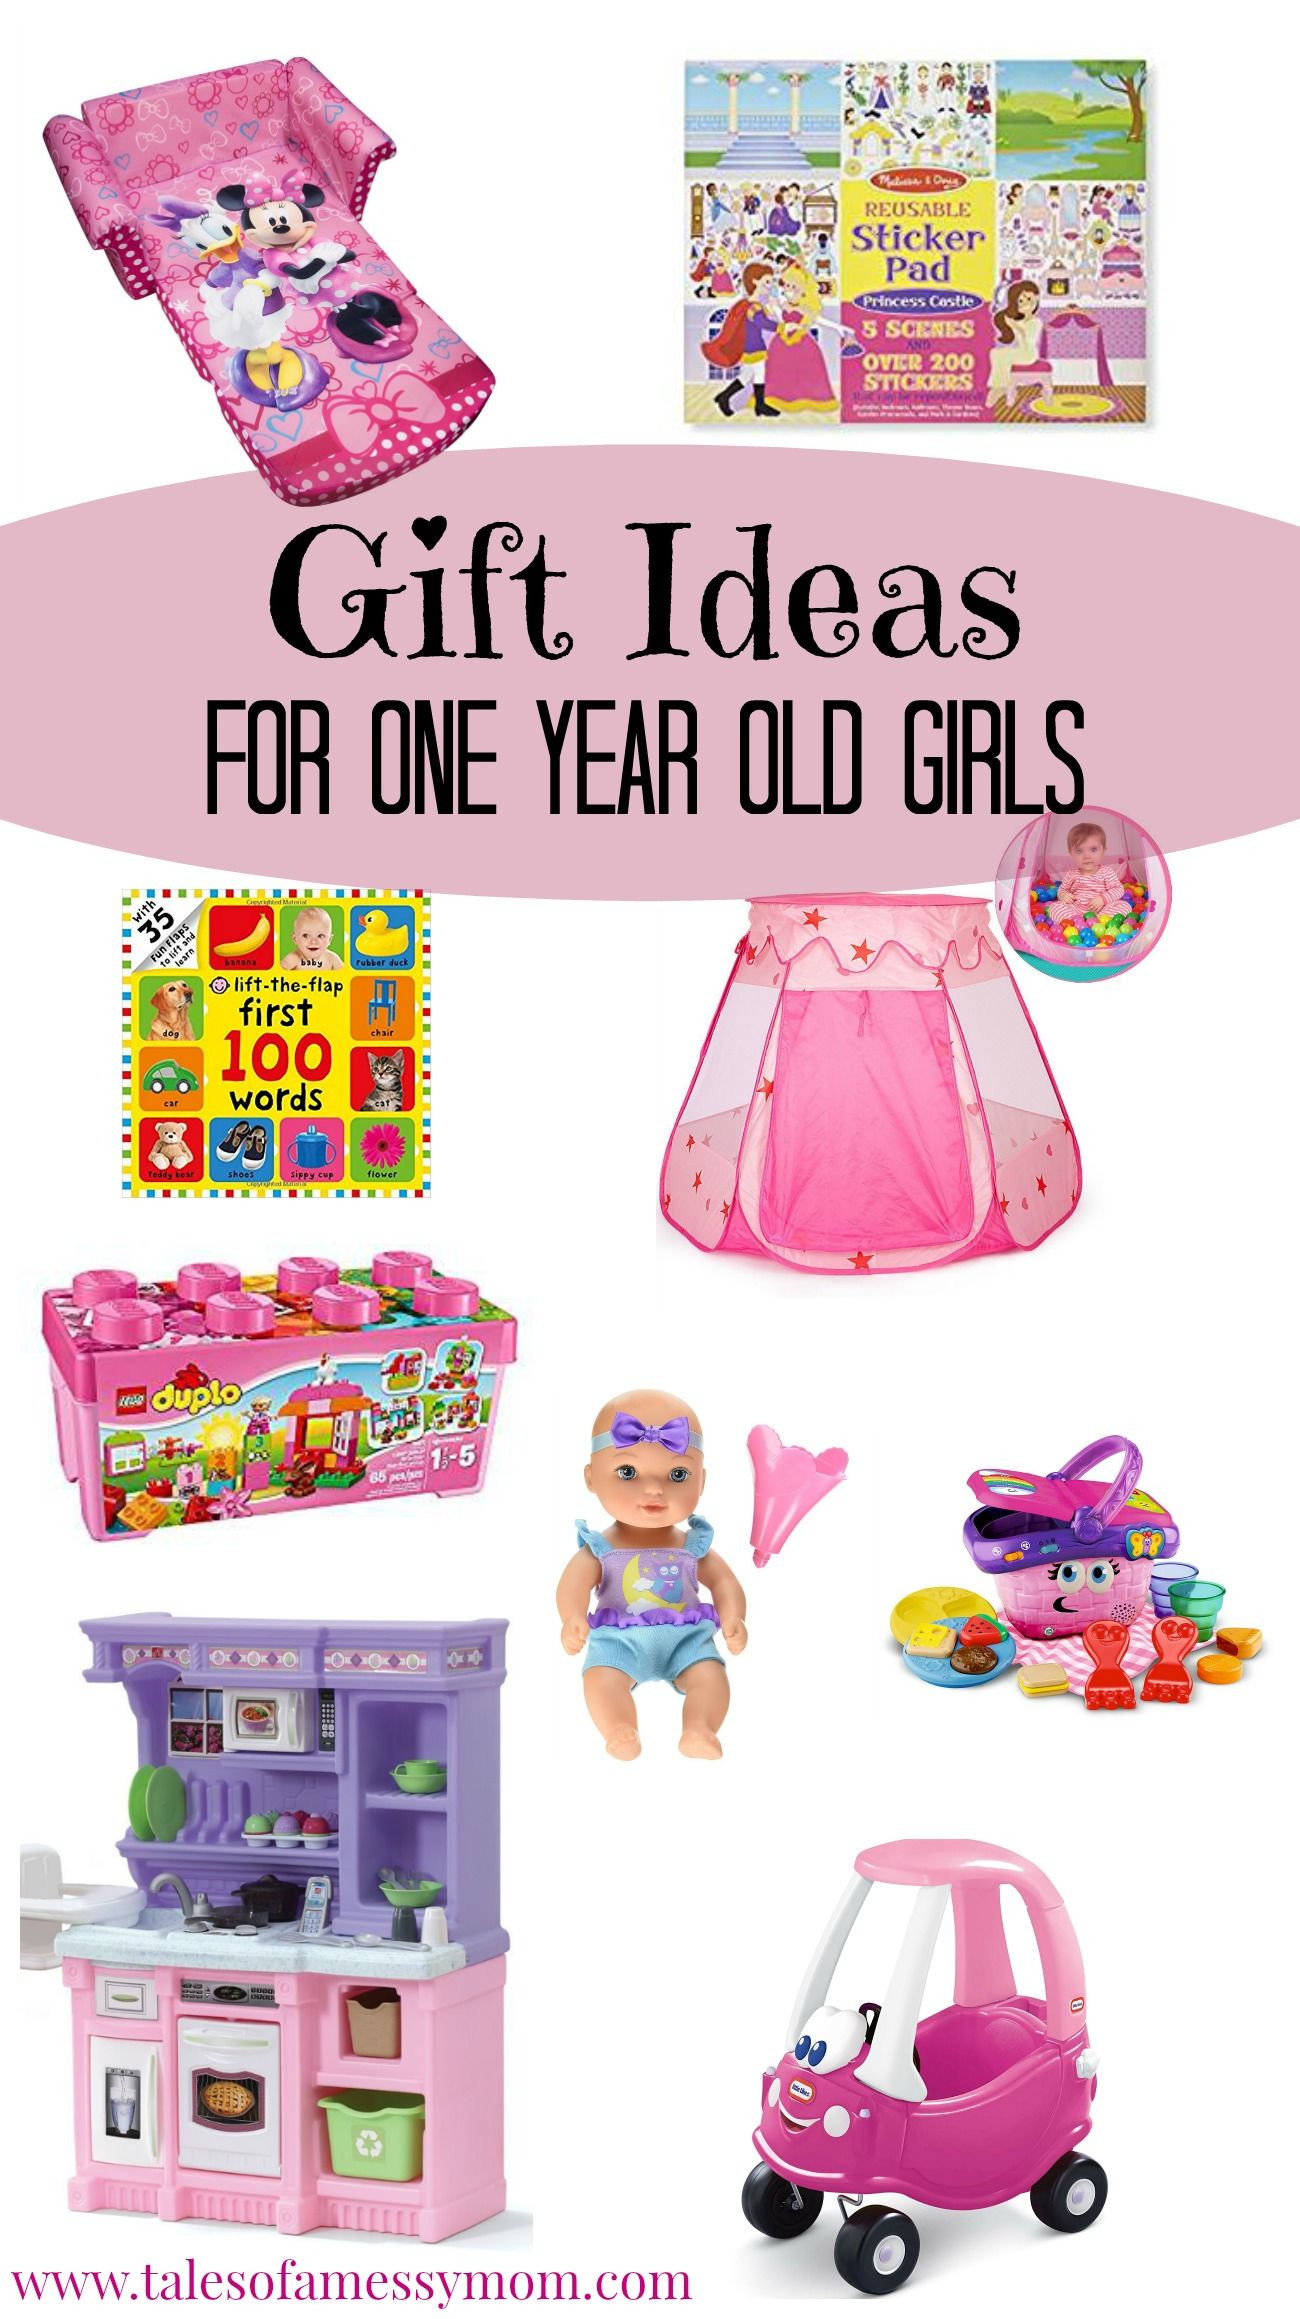 Gift Ideas For Eleven Year Old Girls
 Gift Ideas for e Year Old Girls